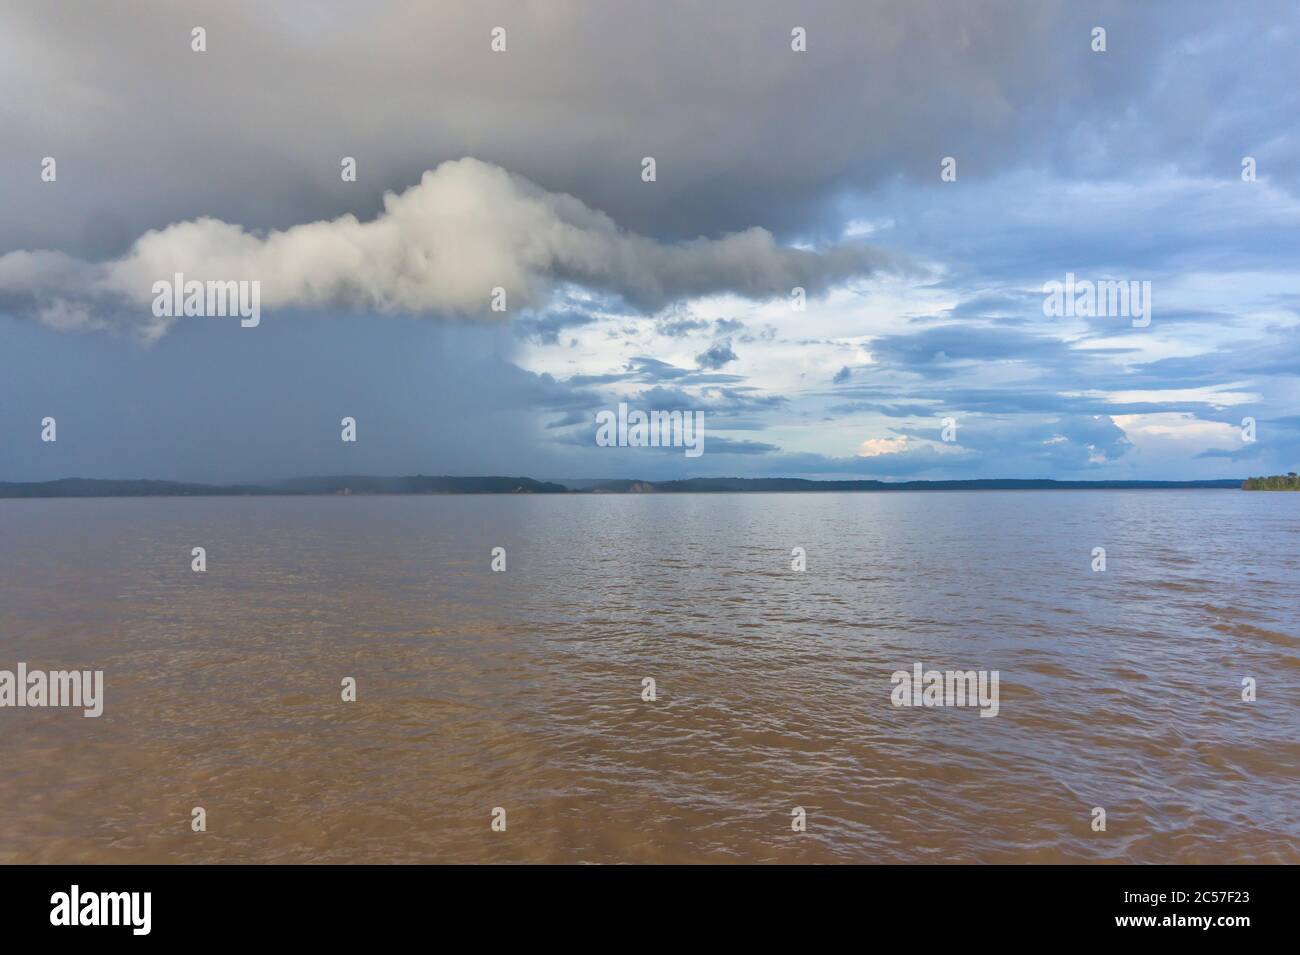 Amazon river Sunset view from a riverboat, Amazon before the storm, Stormy clouds, Amazon Basin, Brazil Stock Photo